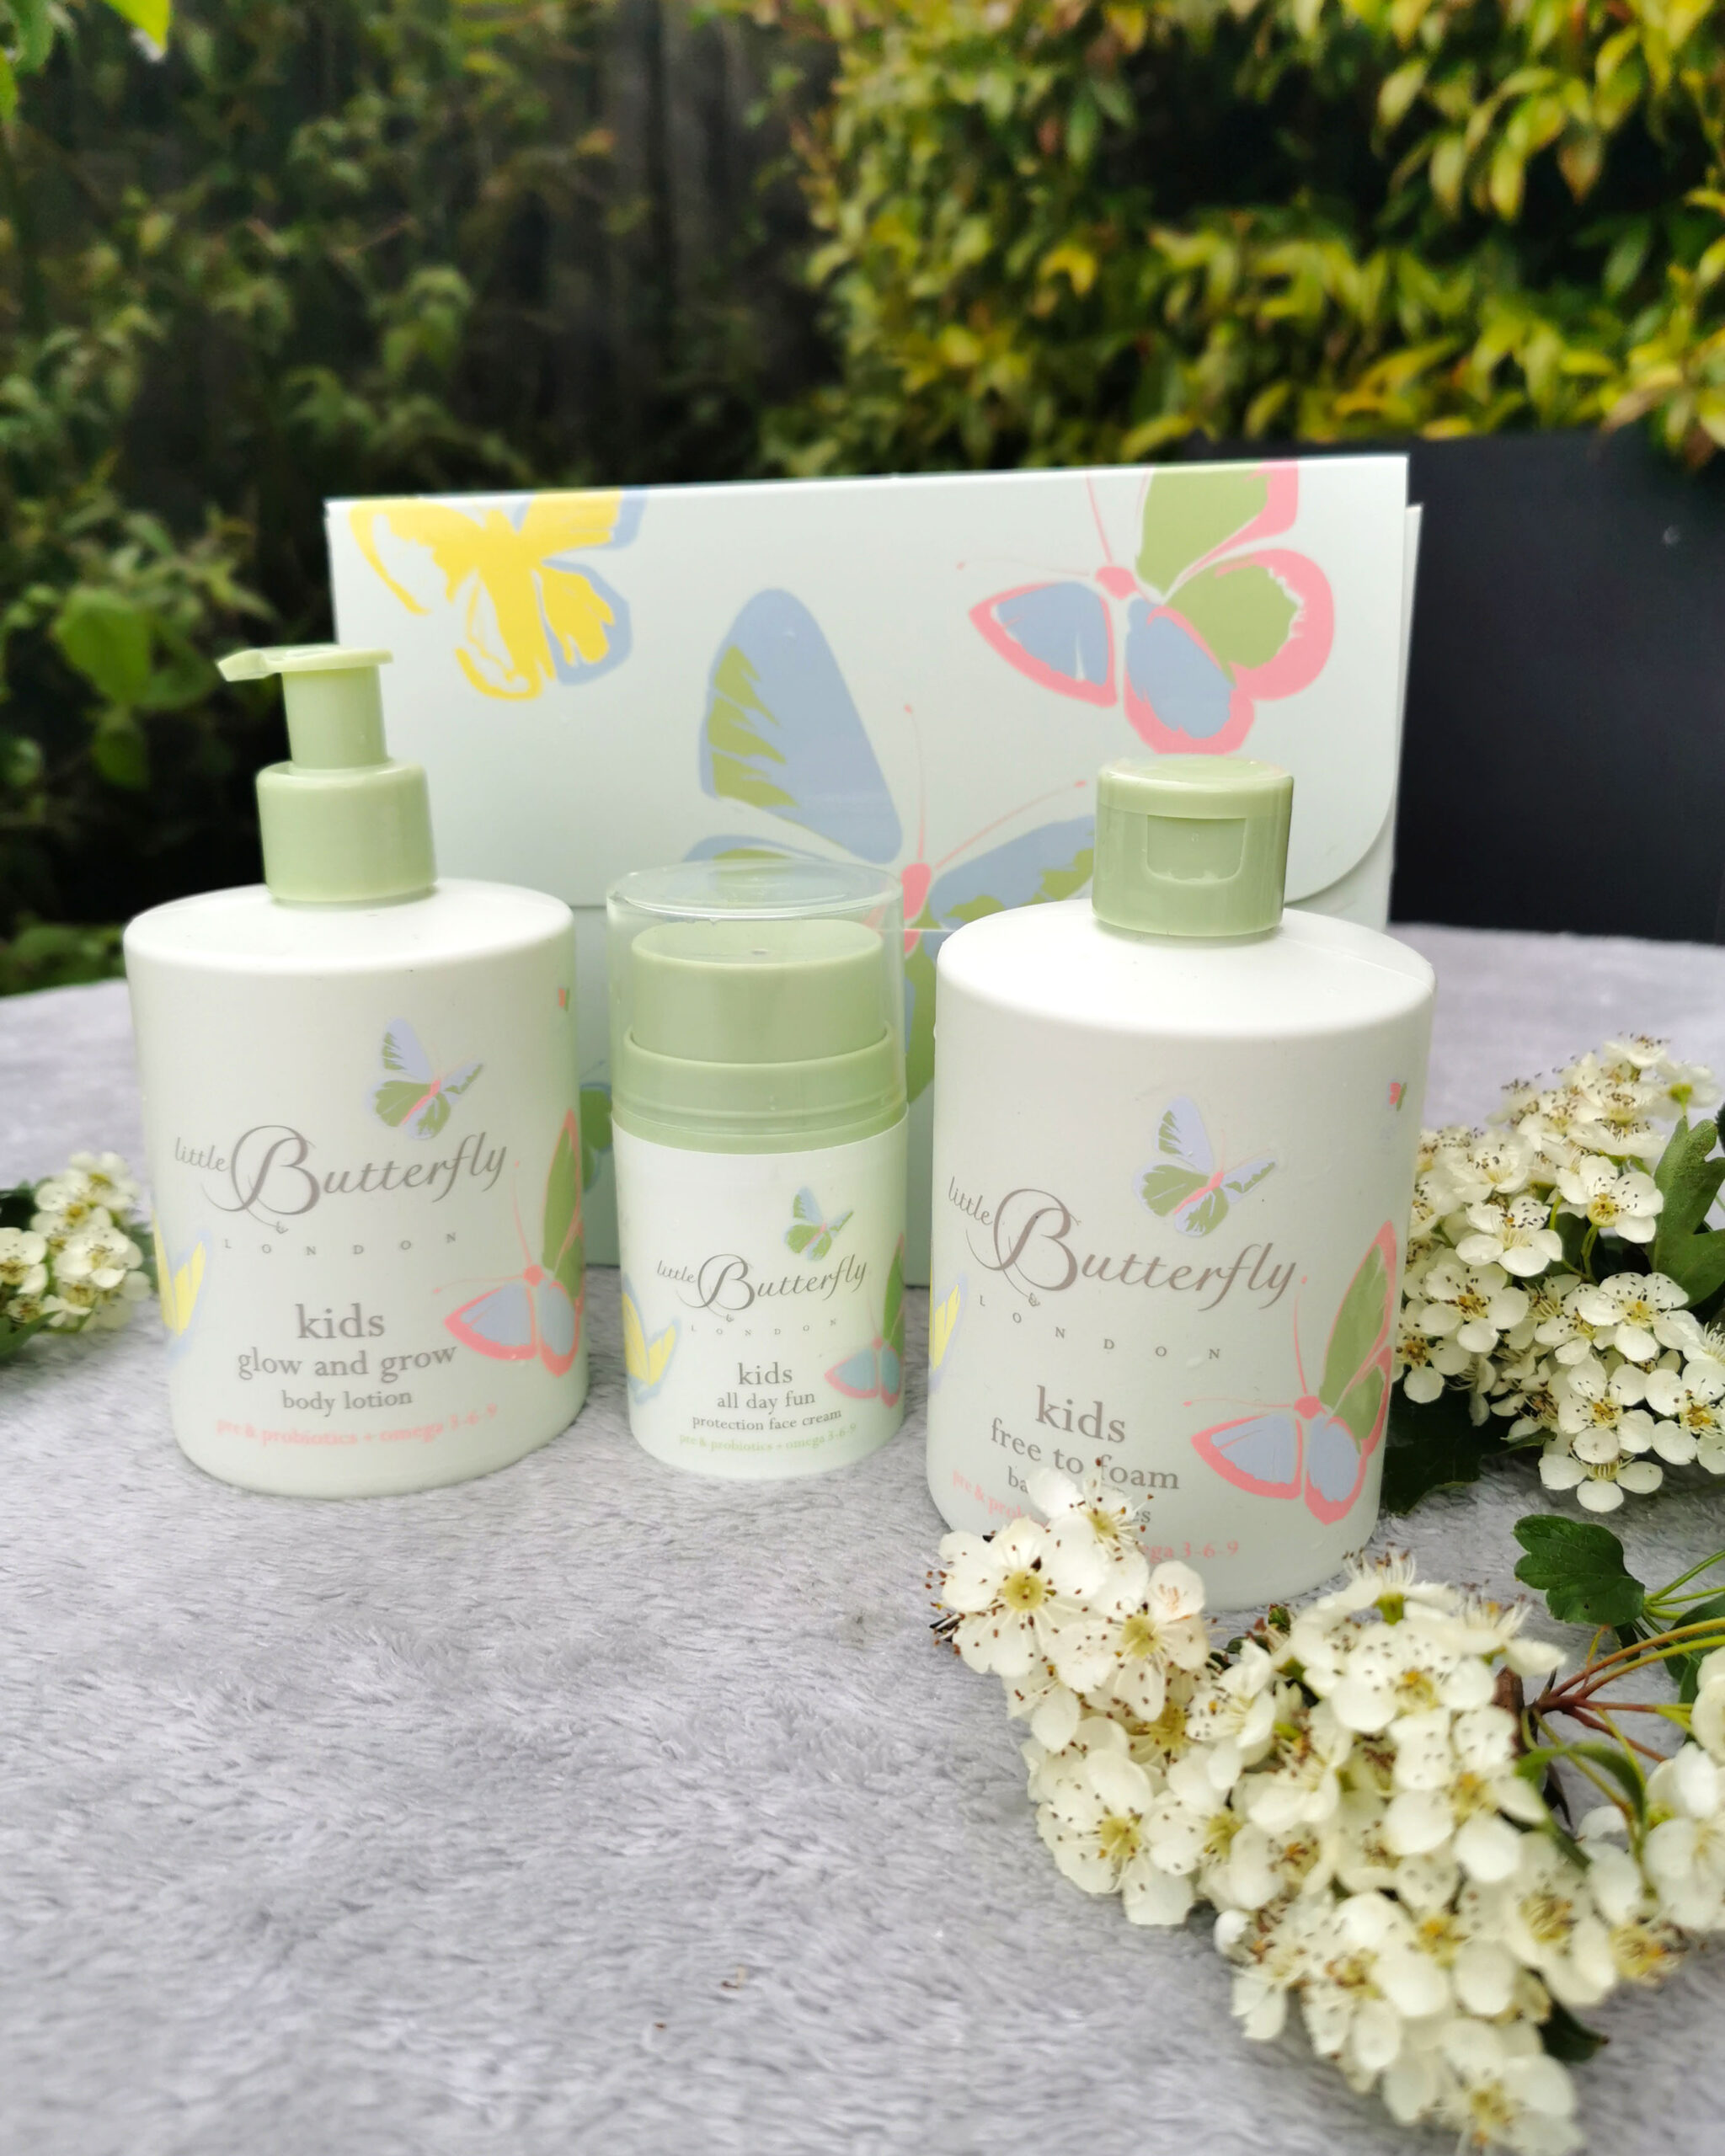 Little Butterfly Kids Bestseller Set, Little Butterfly London, Frenchie Giveaway, Competition, Win, Free, the Frenchie Mummy, Organic Skincare, Mum & Baby, Vegan-Friendly, Natural Skincare, All natural and organic skincare, luxury skincare